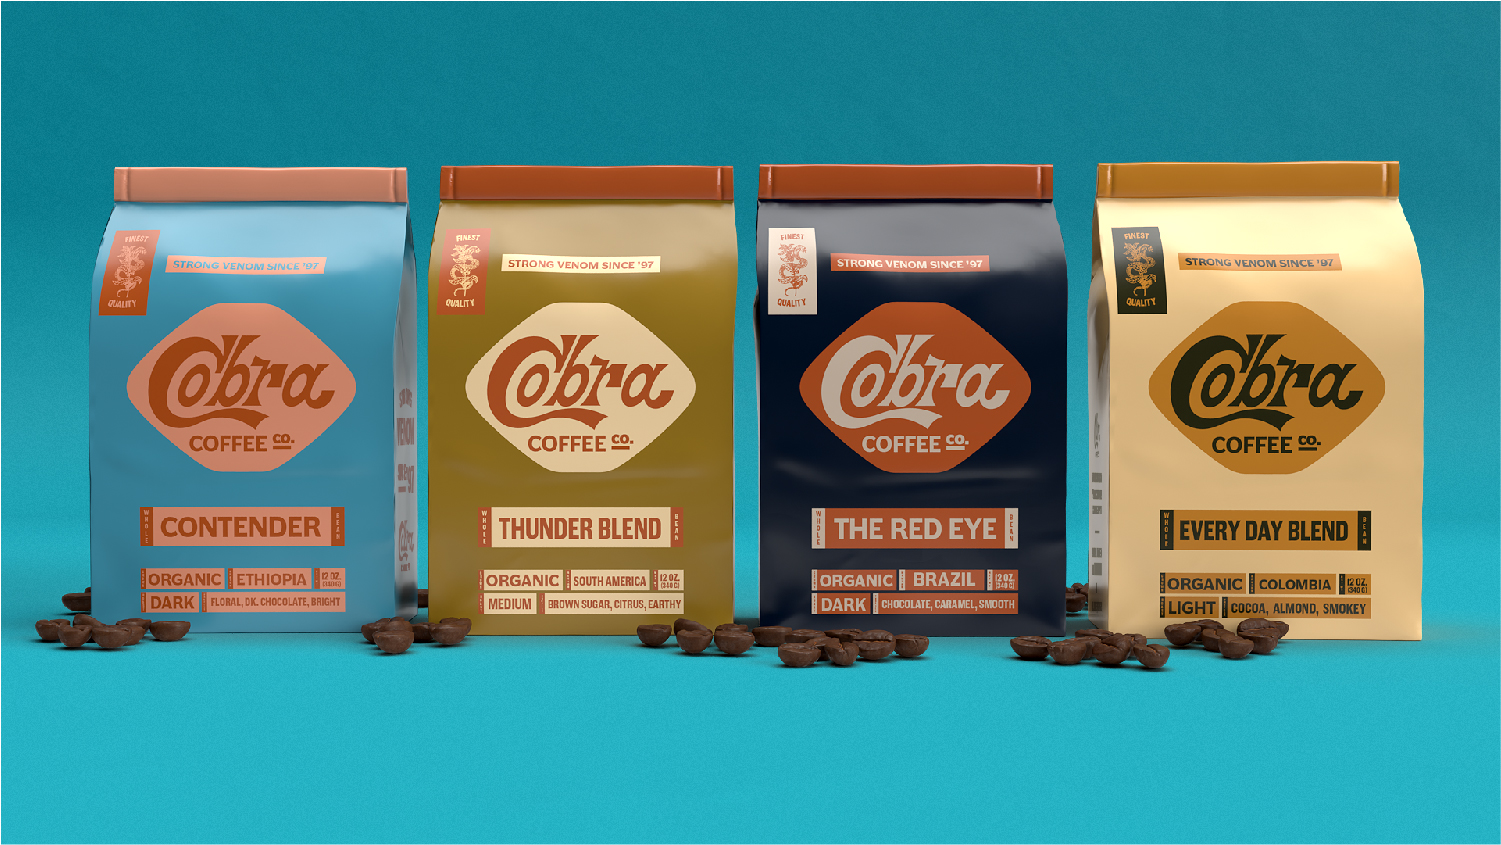 Brand Identity and Packaging Design for Cobra Coffee